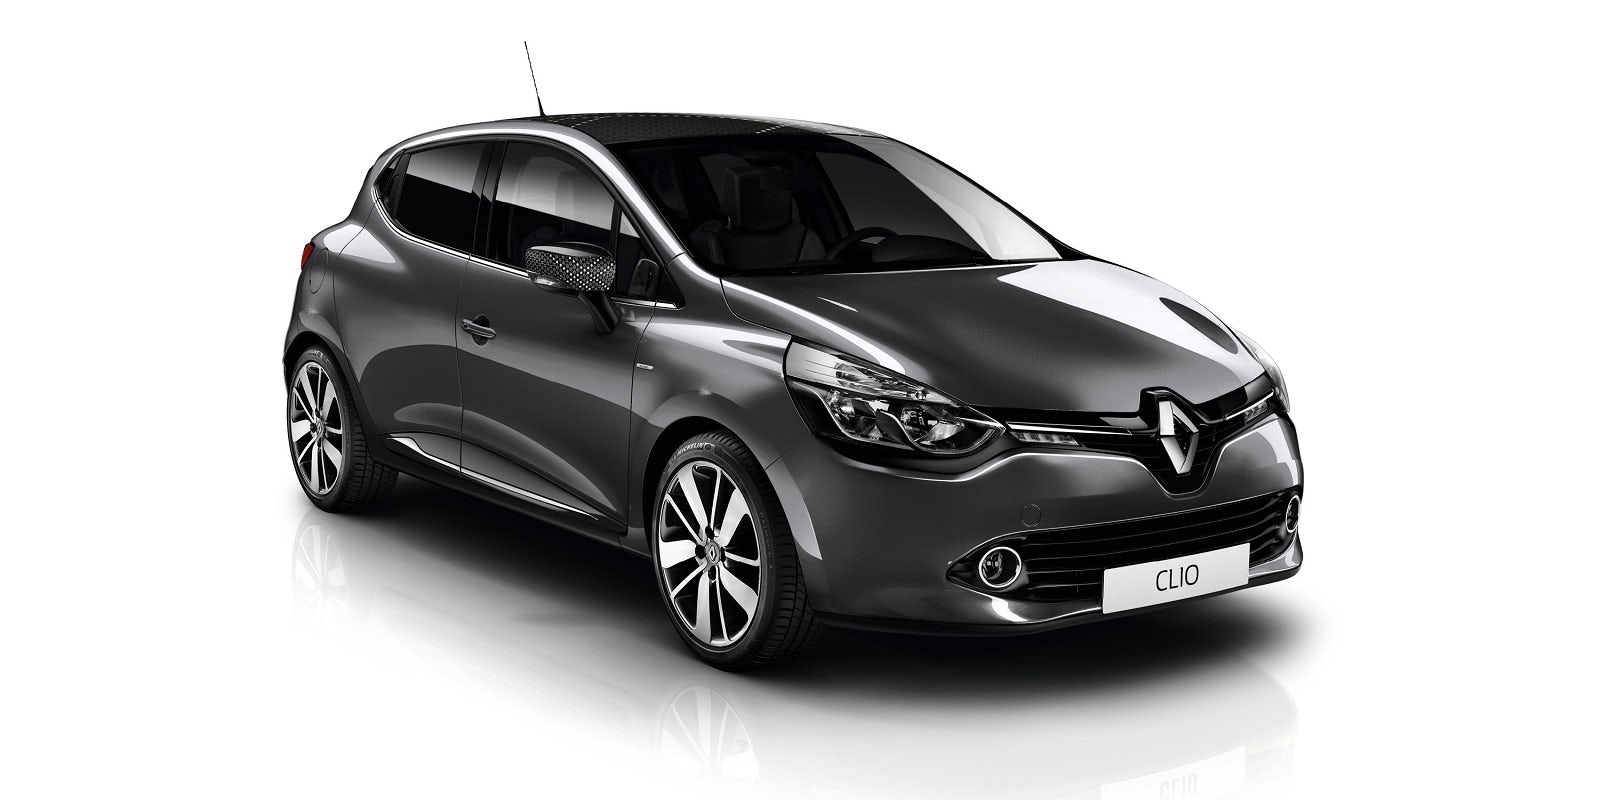 Piepen B olie volume Renault Clio Iconic special edition released | carwow